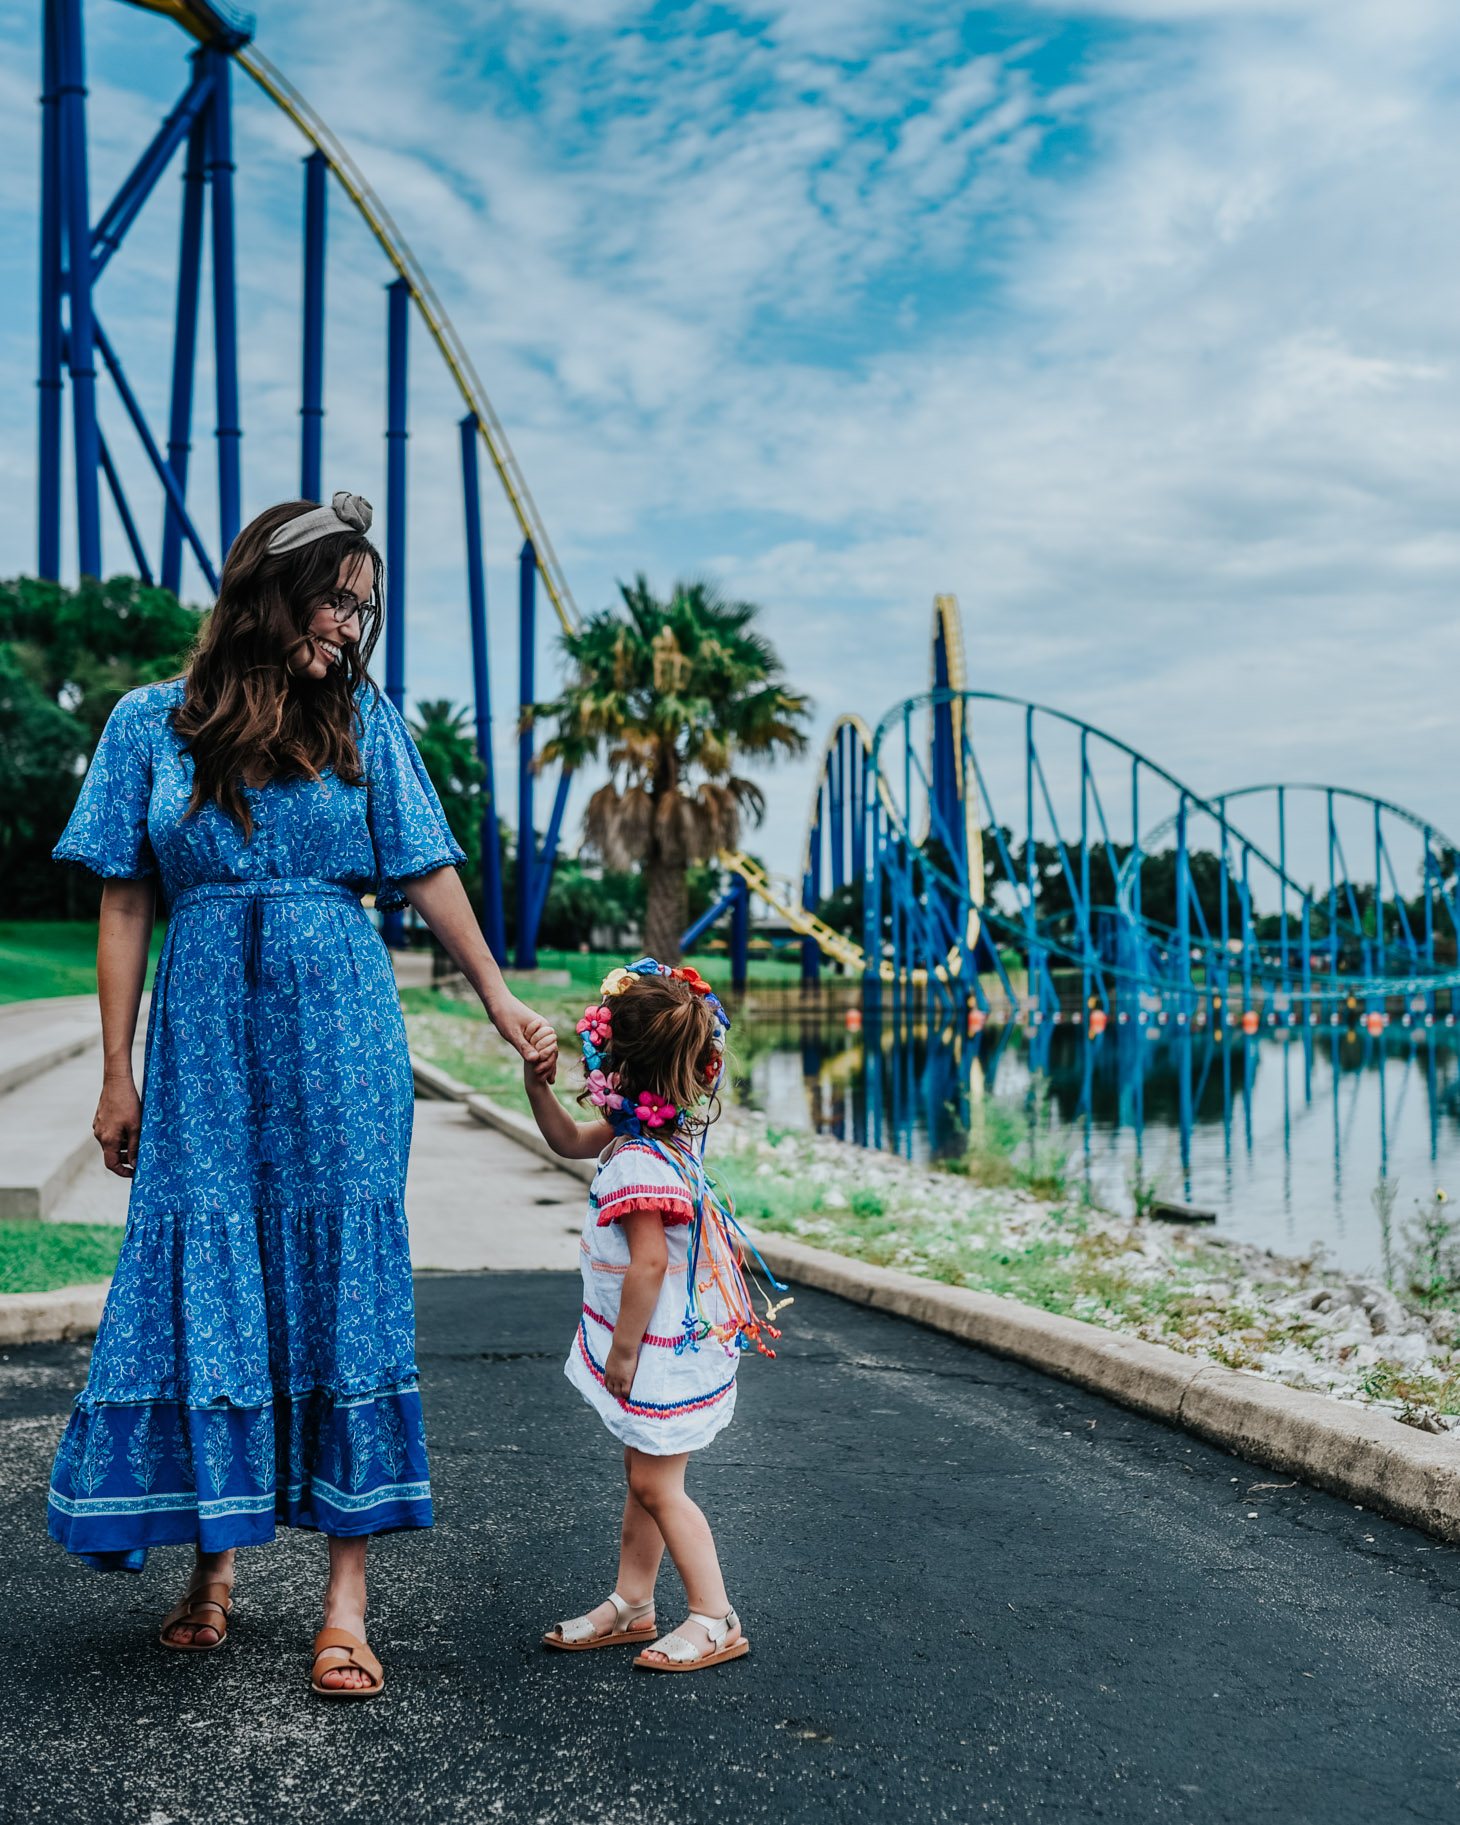 Top 10 Kid Friendly Activities in San Antonio by popular Texas travel blog, Lone Star Looking Glass: image of a mom and her two year old daughter standing next to a roller coaster at Sea World San Antonio.